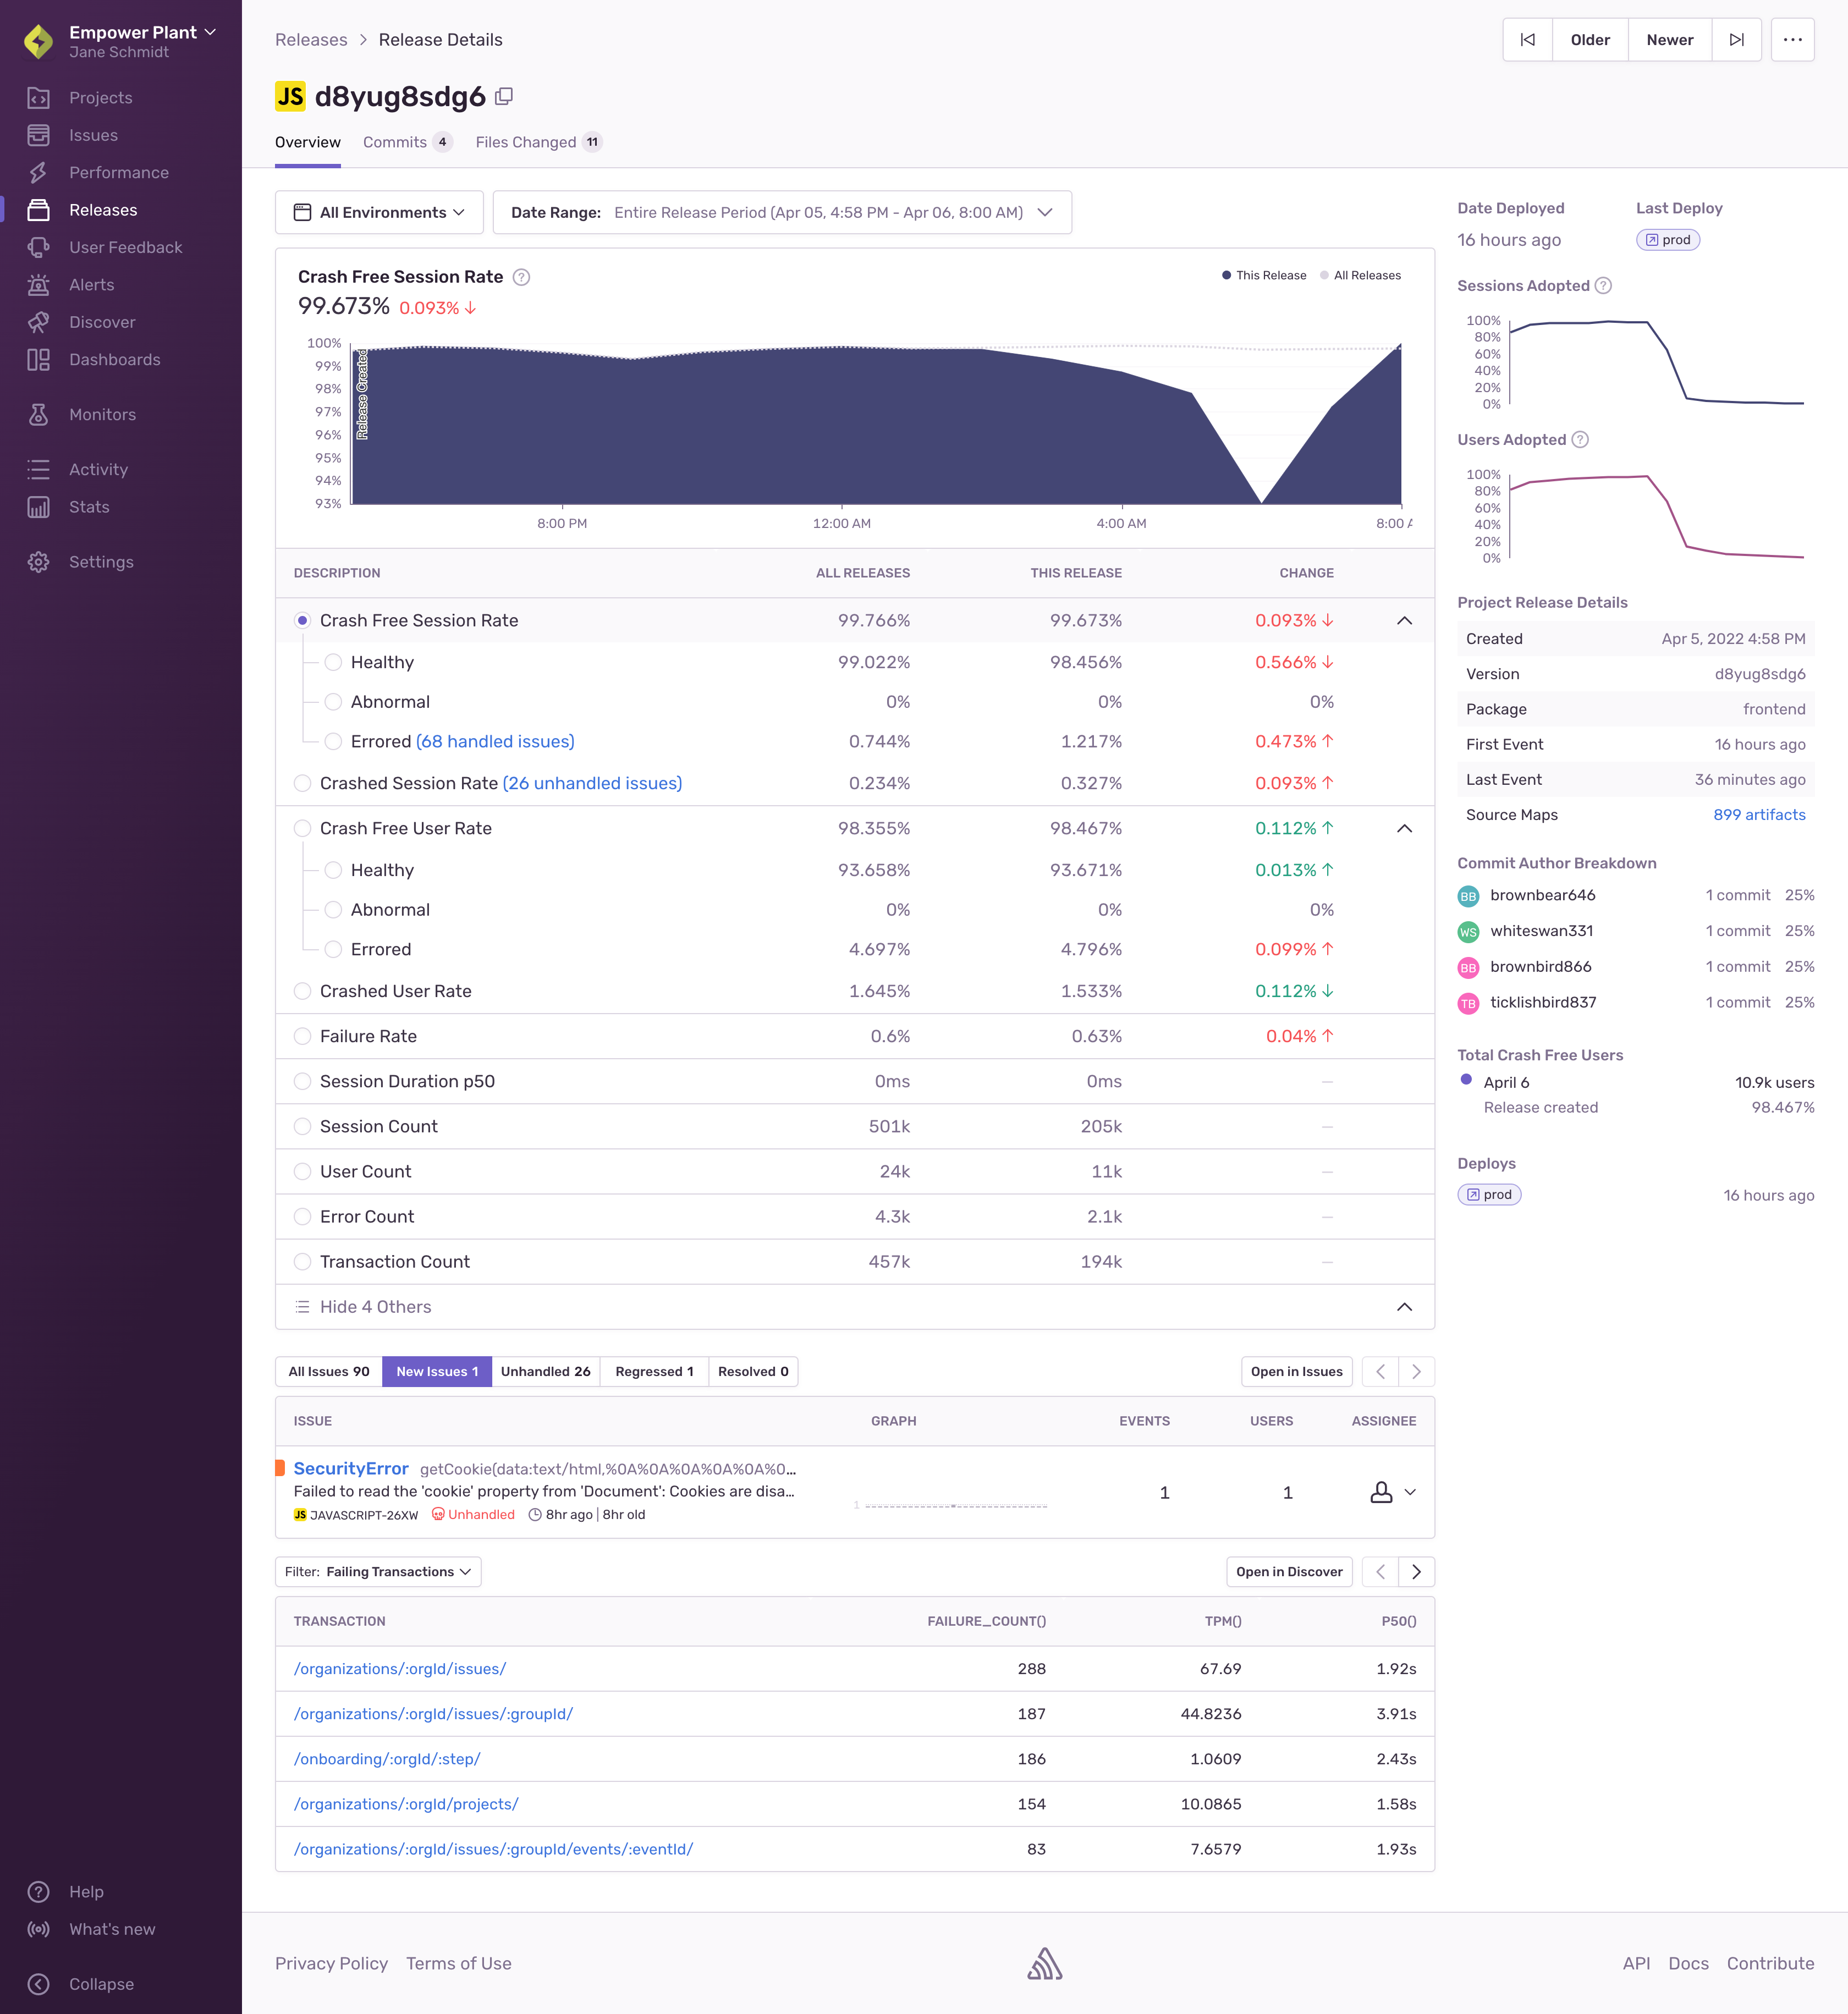 View of the release details page showing a release comparison graph, issues, adoption, and other details.